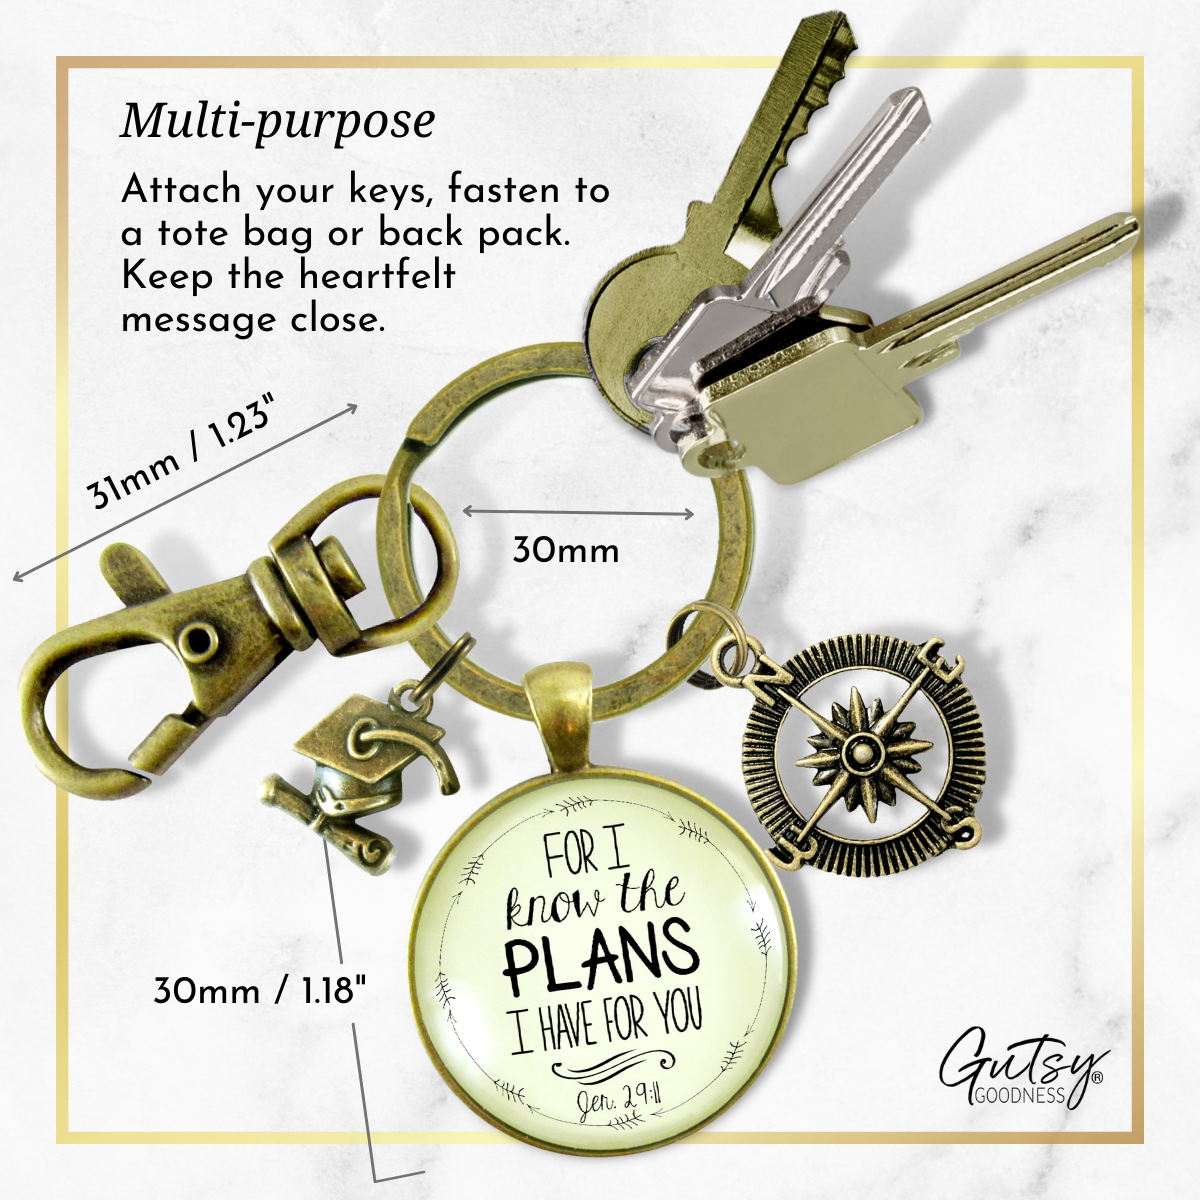 Graduate For I Know the Plans Jeremiah 29 11 Keyring Jewelry Compass Graduation Tassel Cap Charm - Gutsy Goodness Handmade Jewelry;Graduate For I Know The Plans Jeremiah 29 11 Keyring Jewelry Compass Graduation Tassel Cap Charm - Gutsy Goodness Handmade Jewelry Gifts